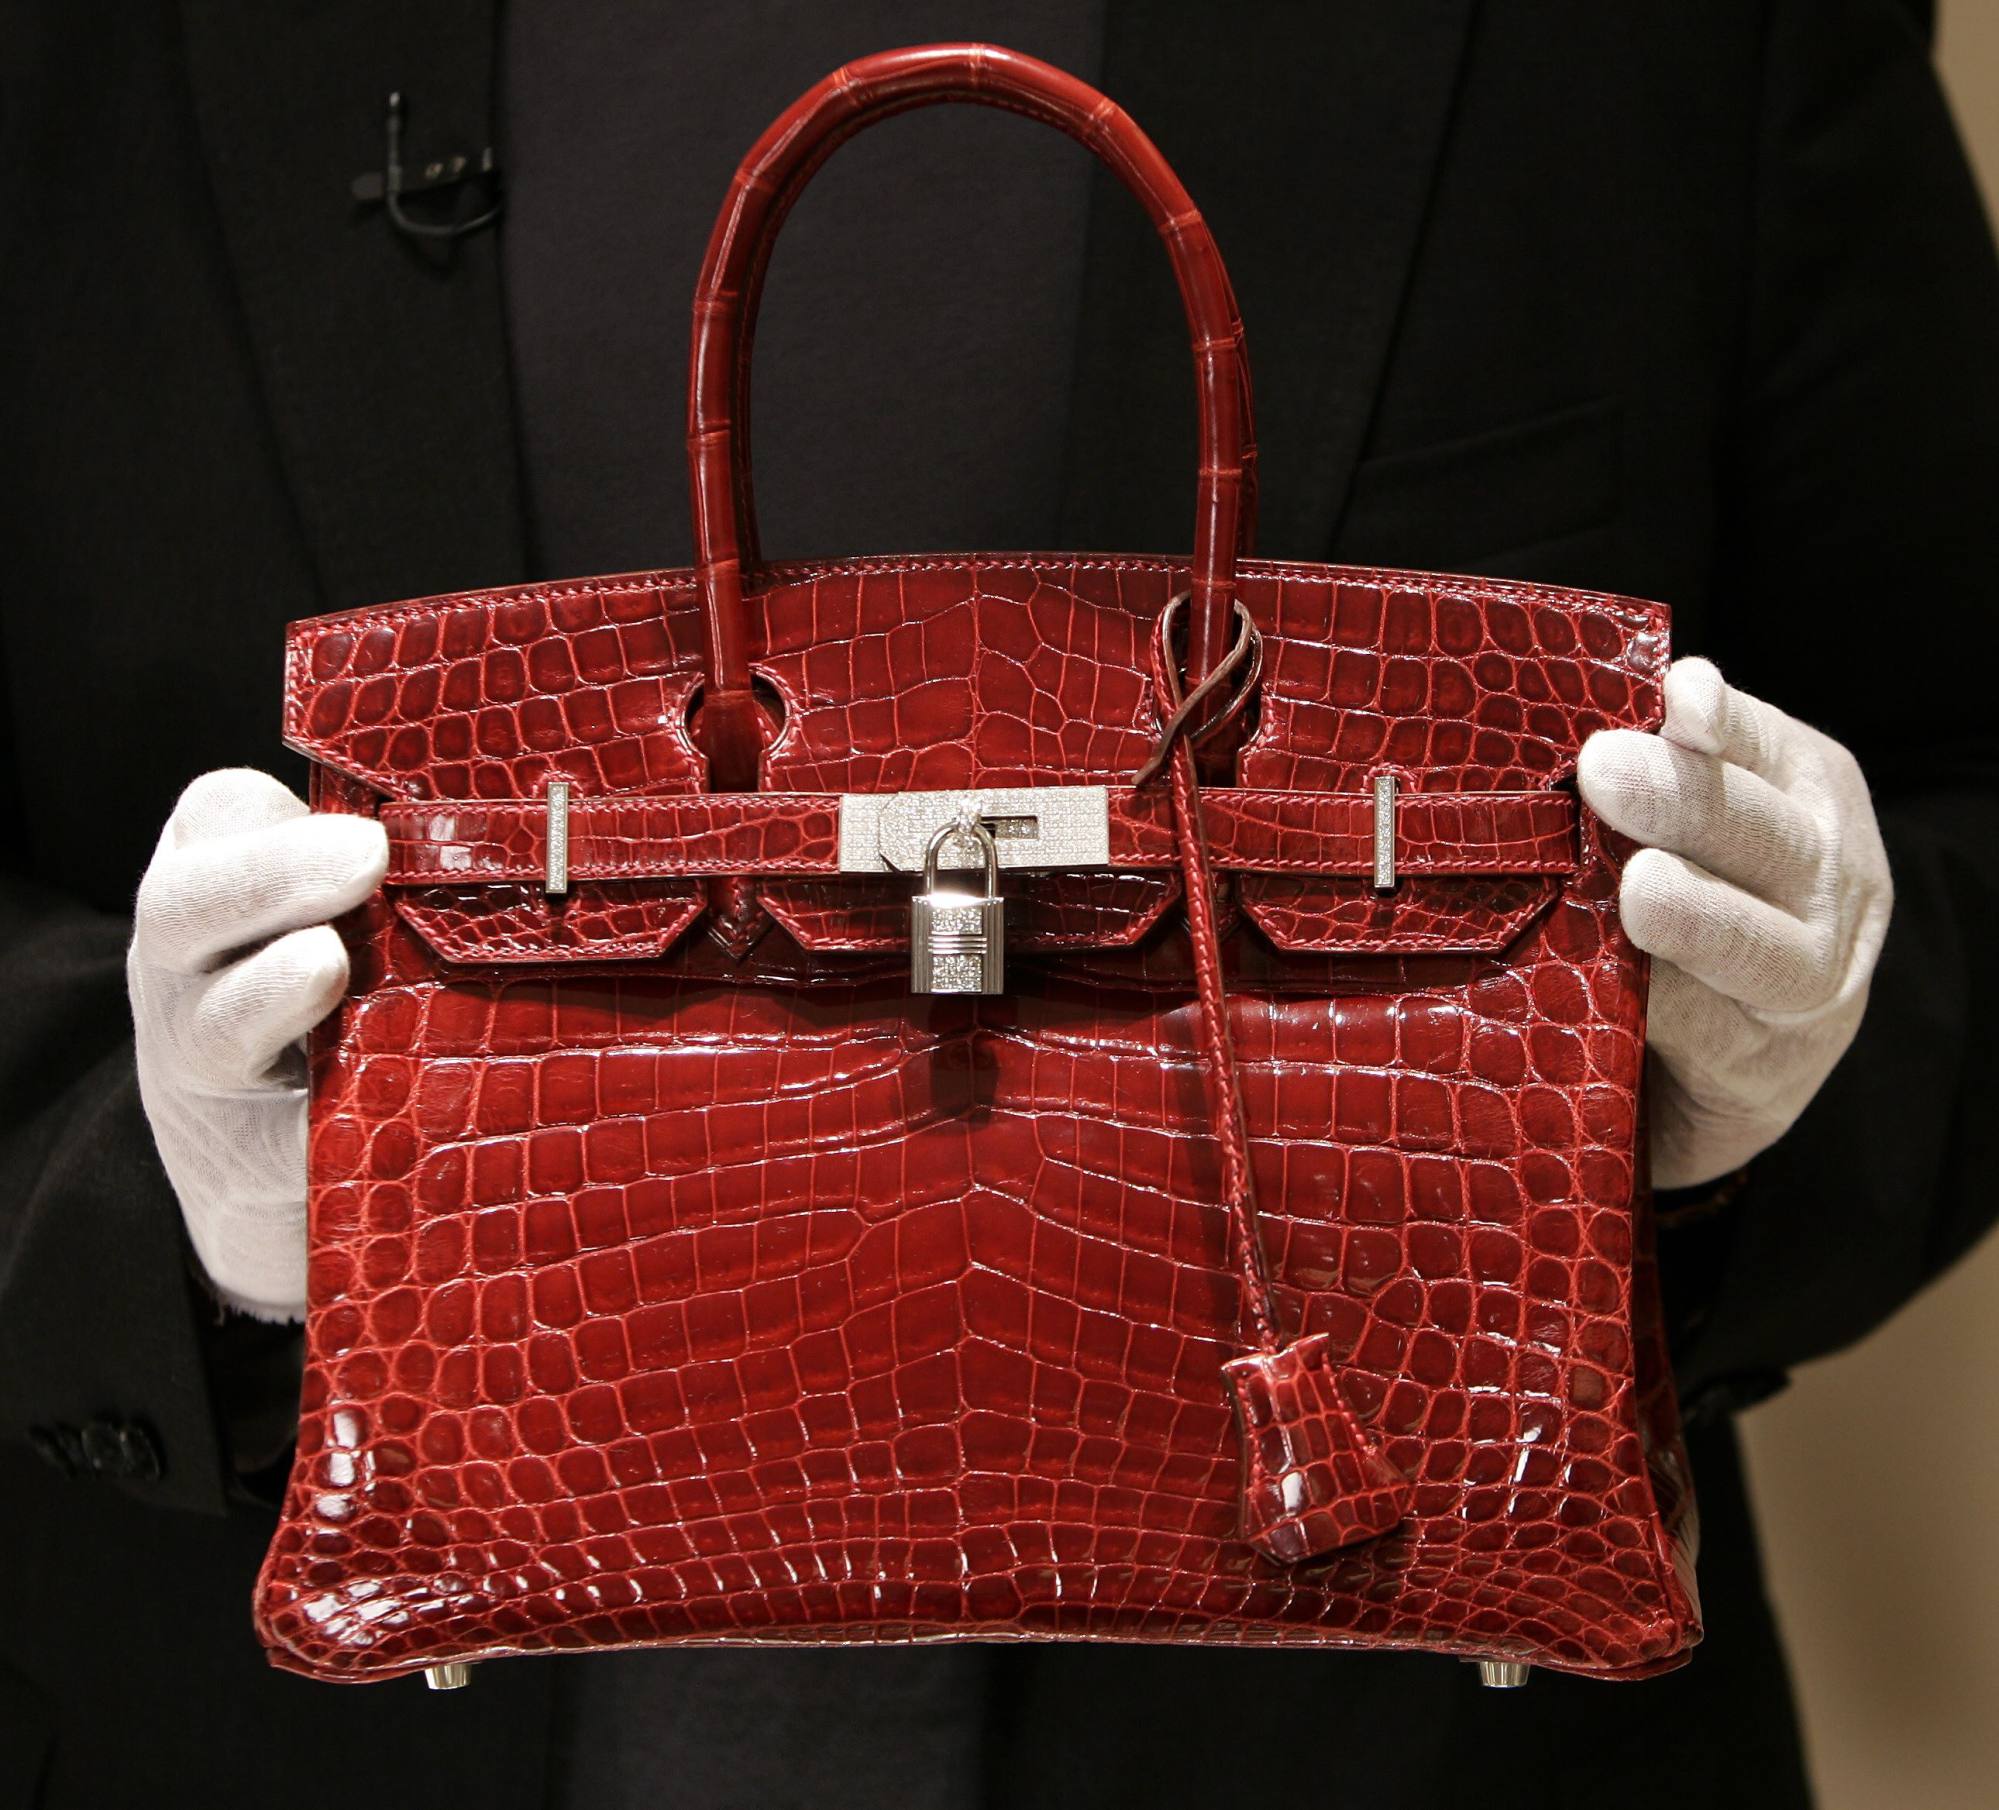 5 headline-making Hermès Birkin handbag robberies: from Paris Hilton's  Bling Ring losses that also included Dior and Louis Vuitton bags, to  RHOBH's Kyle Richards and a hospitalised Saudi princess